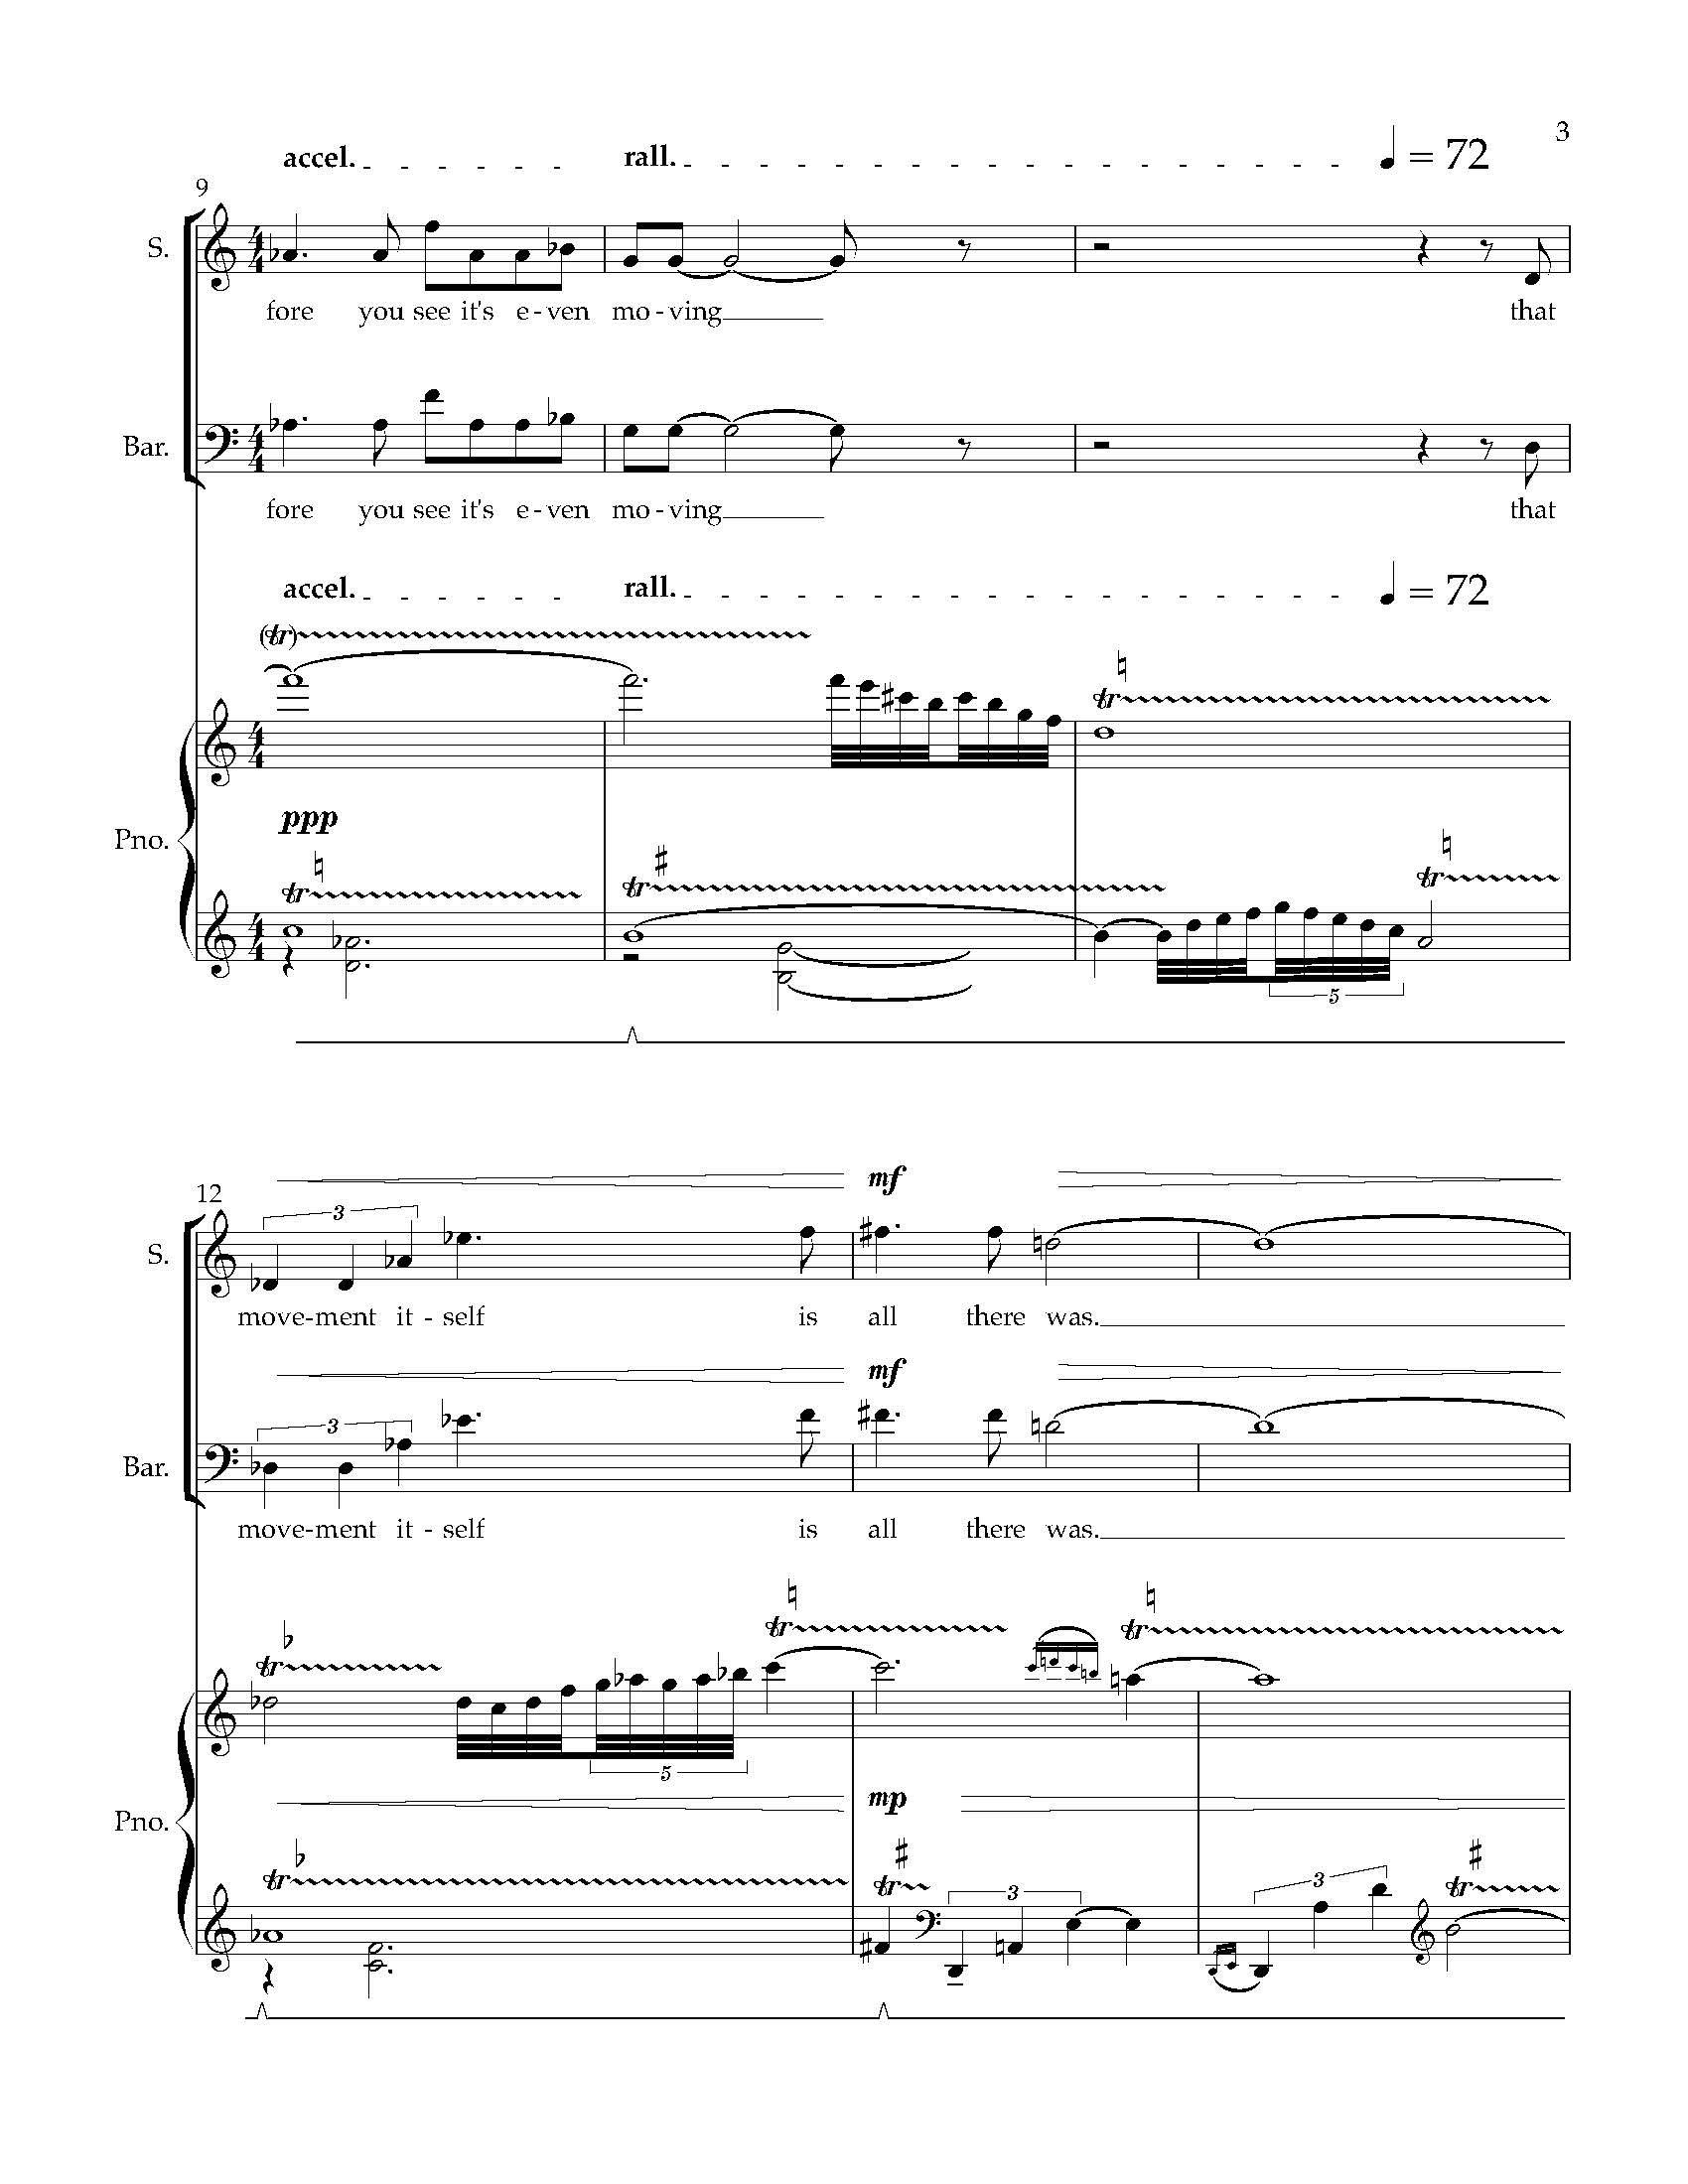 Sky - Complete Score (Revised)_Page_09.jpg